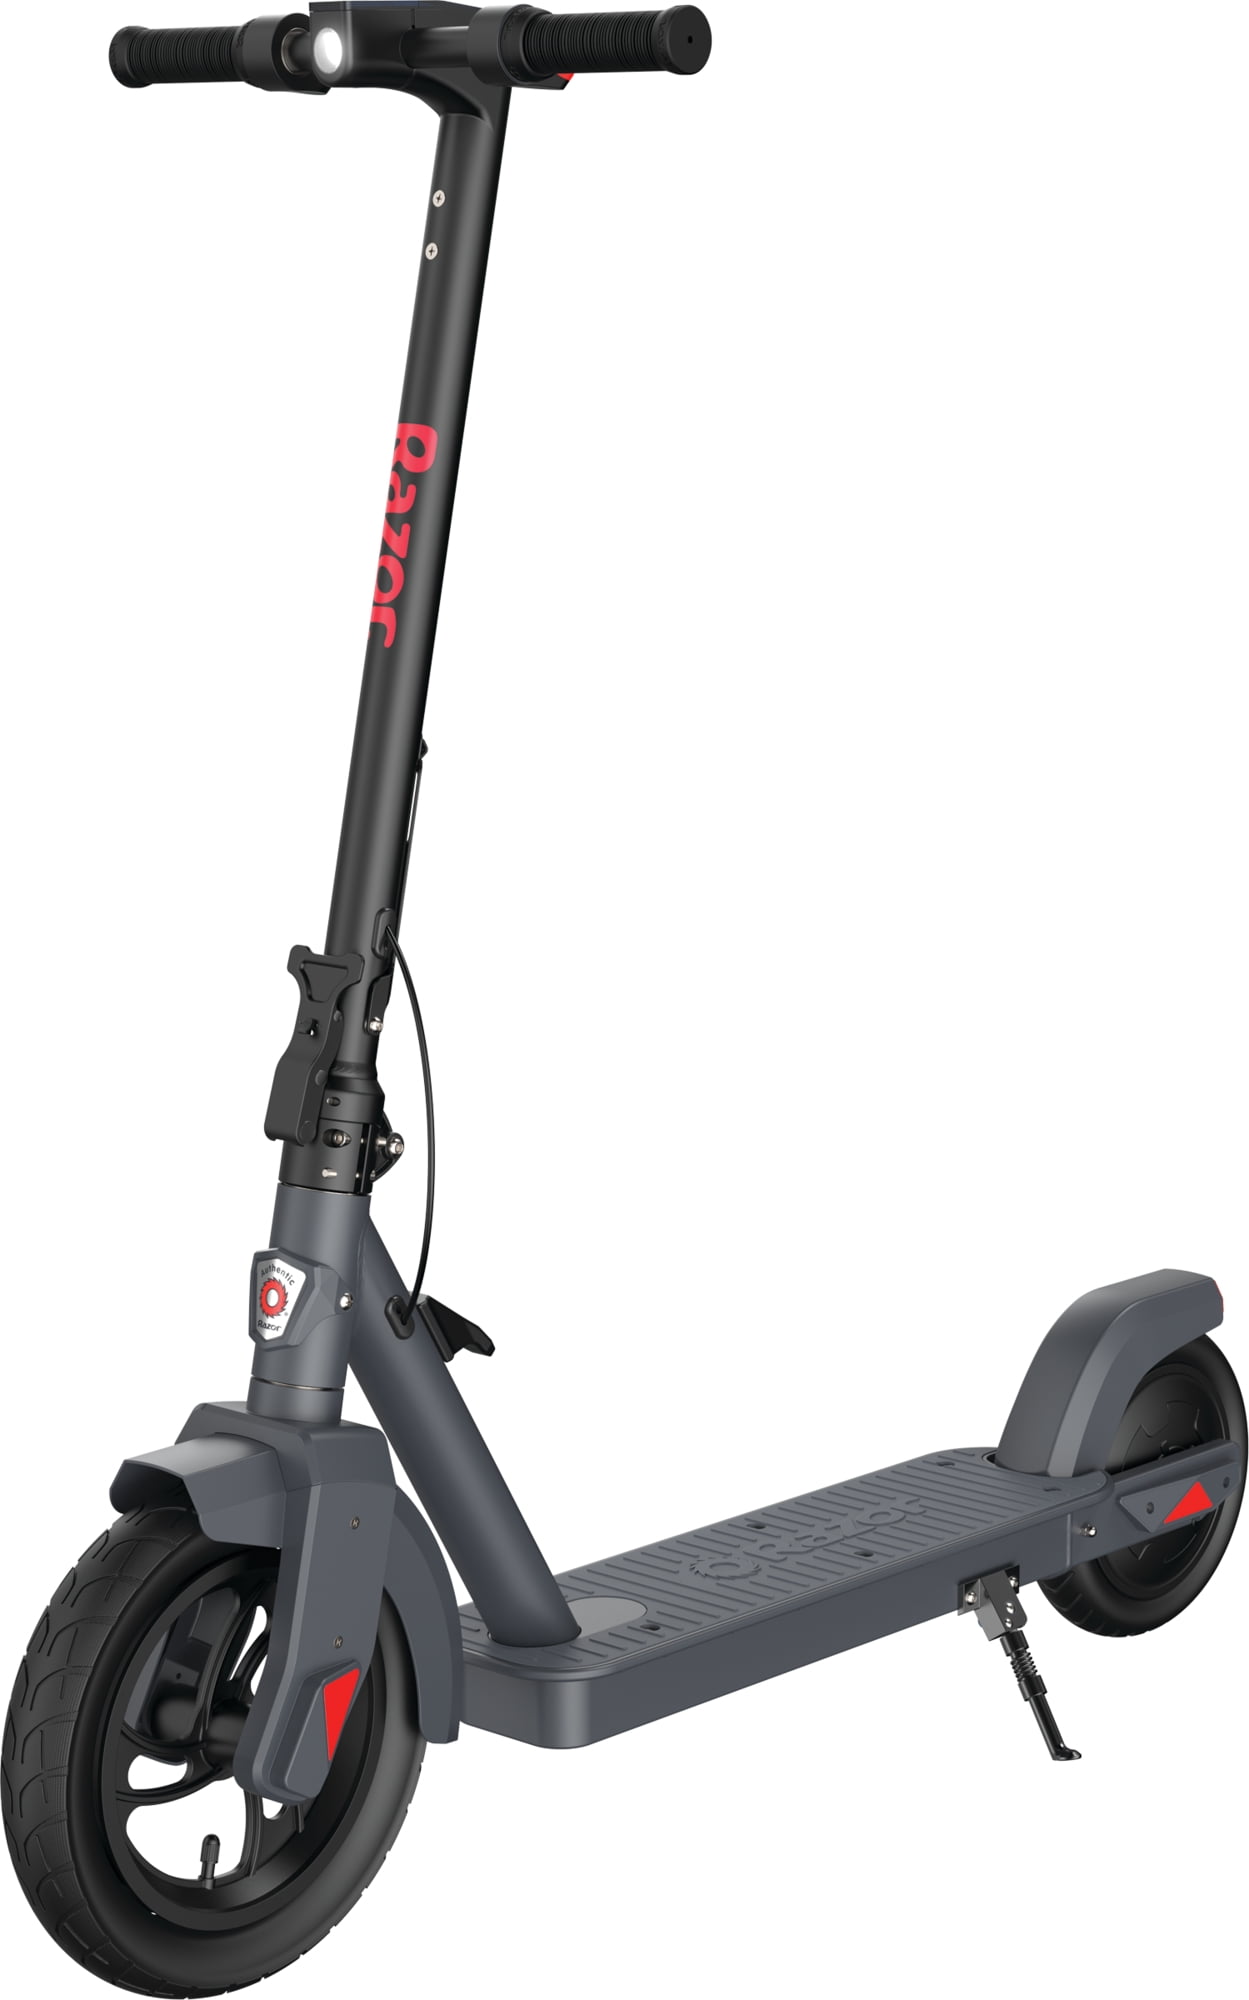 sandaler Converge Mentalt Razor C25 Commuting Folding Electric Scooter for Adults up to 220 lbs., up  to 18 mph and 18-mile Range, Large Pneumatic Tires and Durable Frame, 250W  Hub Motor Rear-Wheel Drive, 36V Lithium-Ion